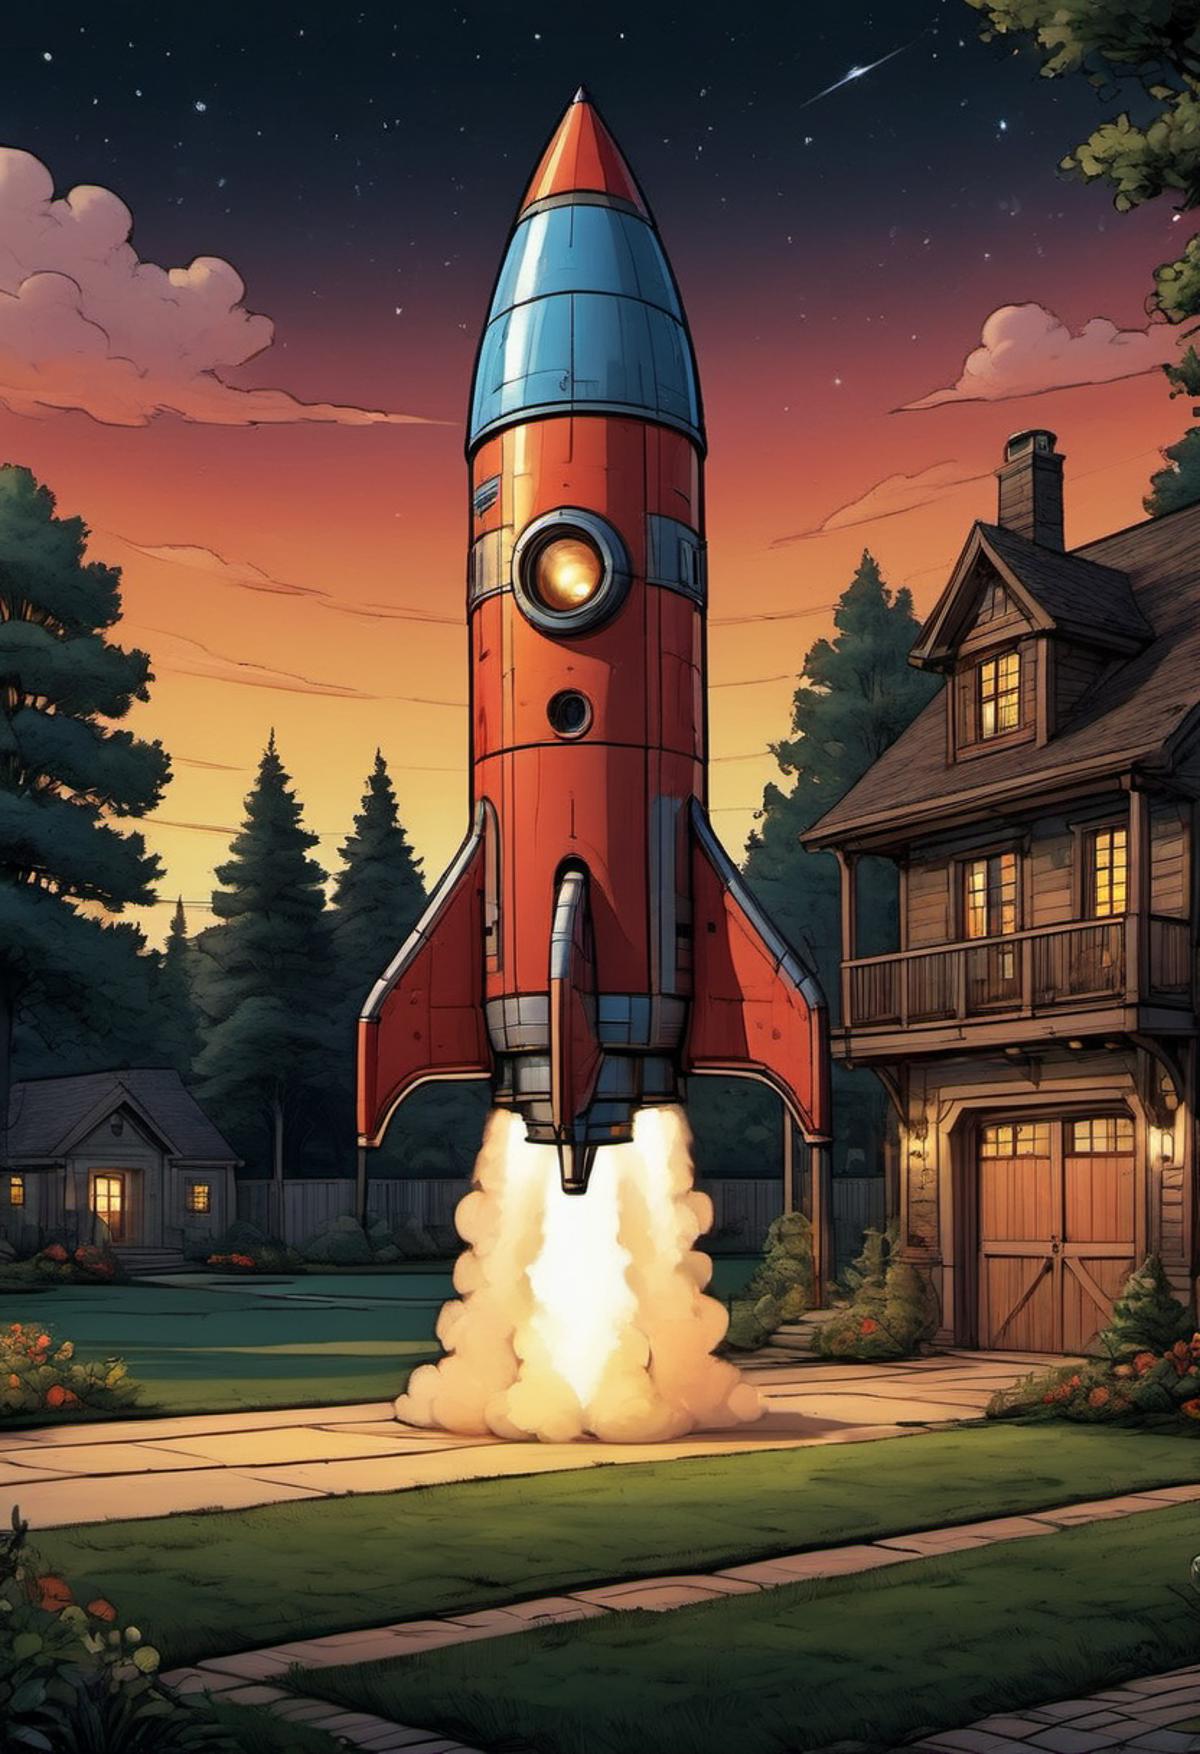 A Red Rocket Ship Launching into Space in Front of a House